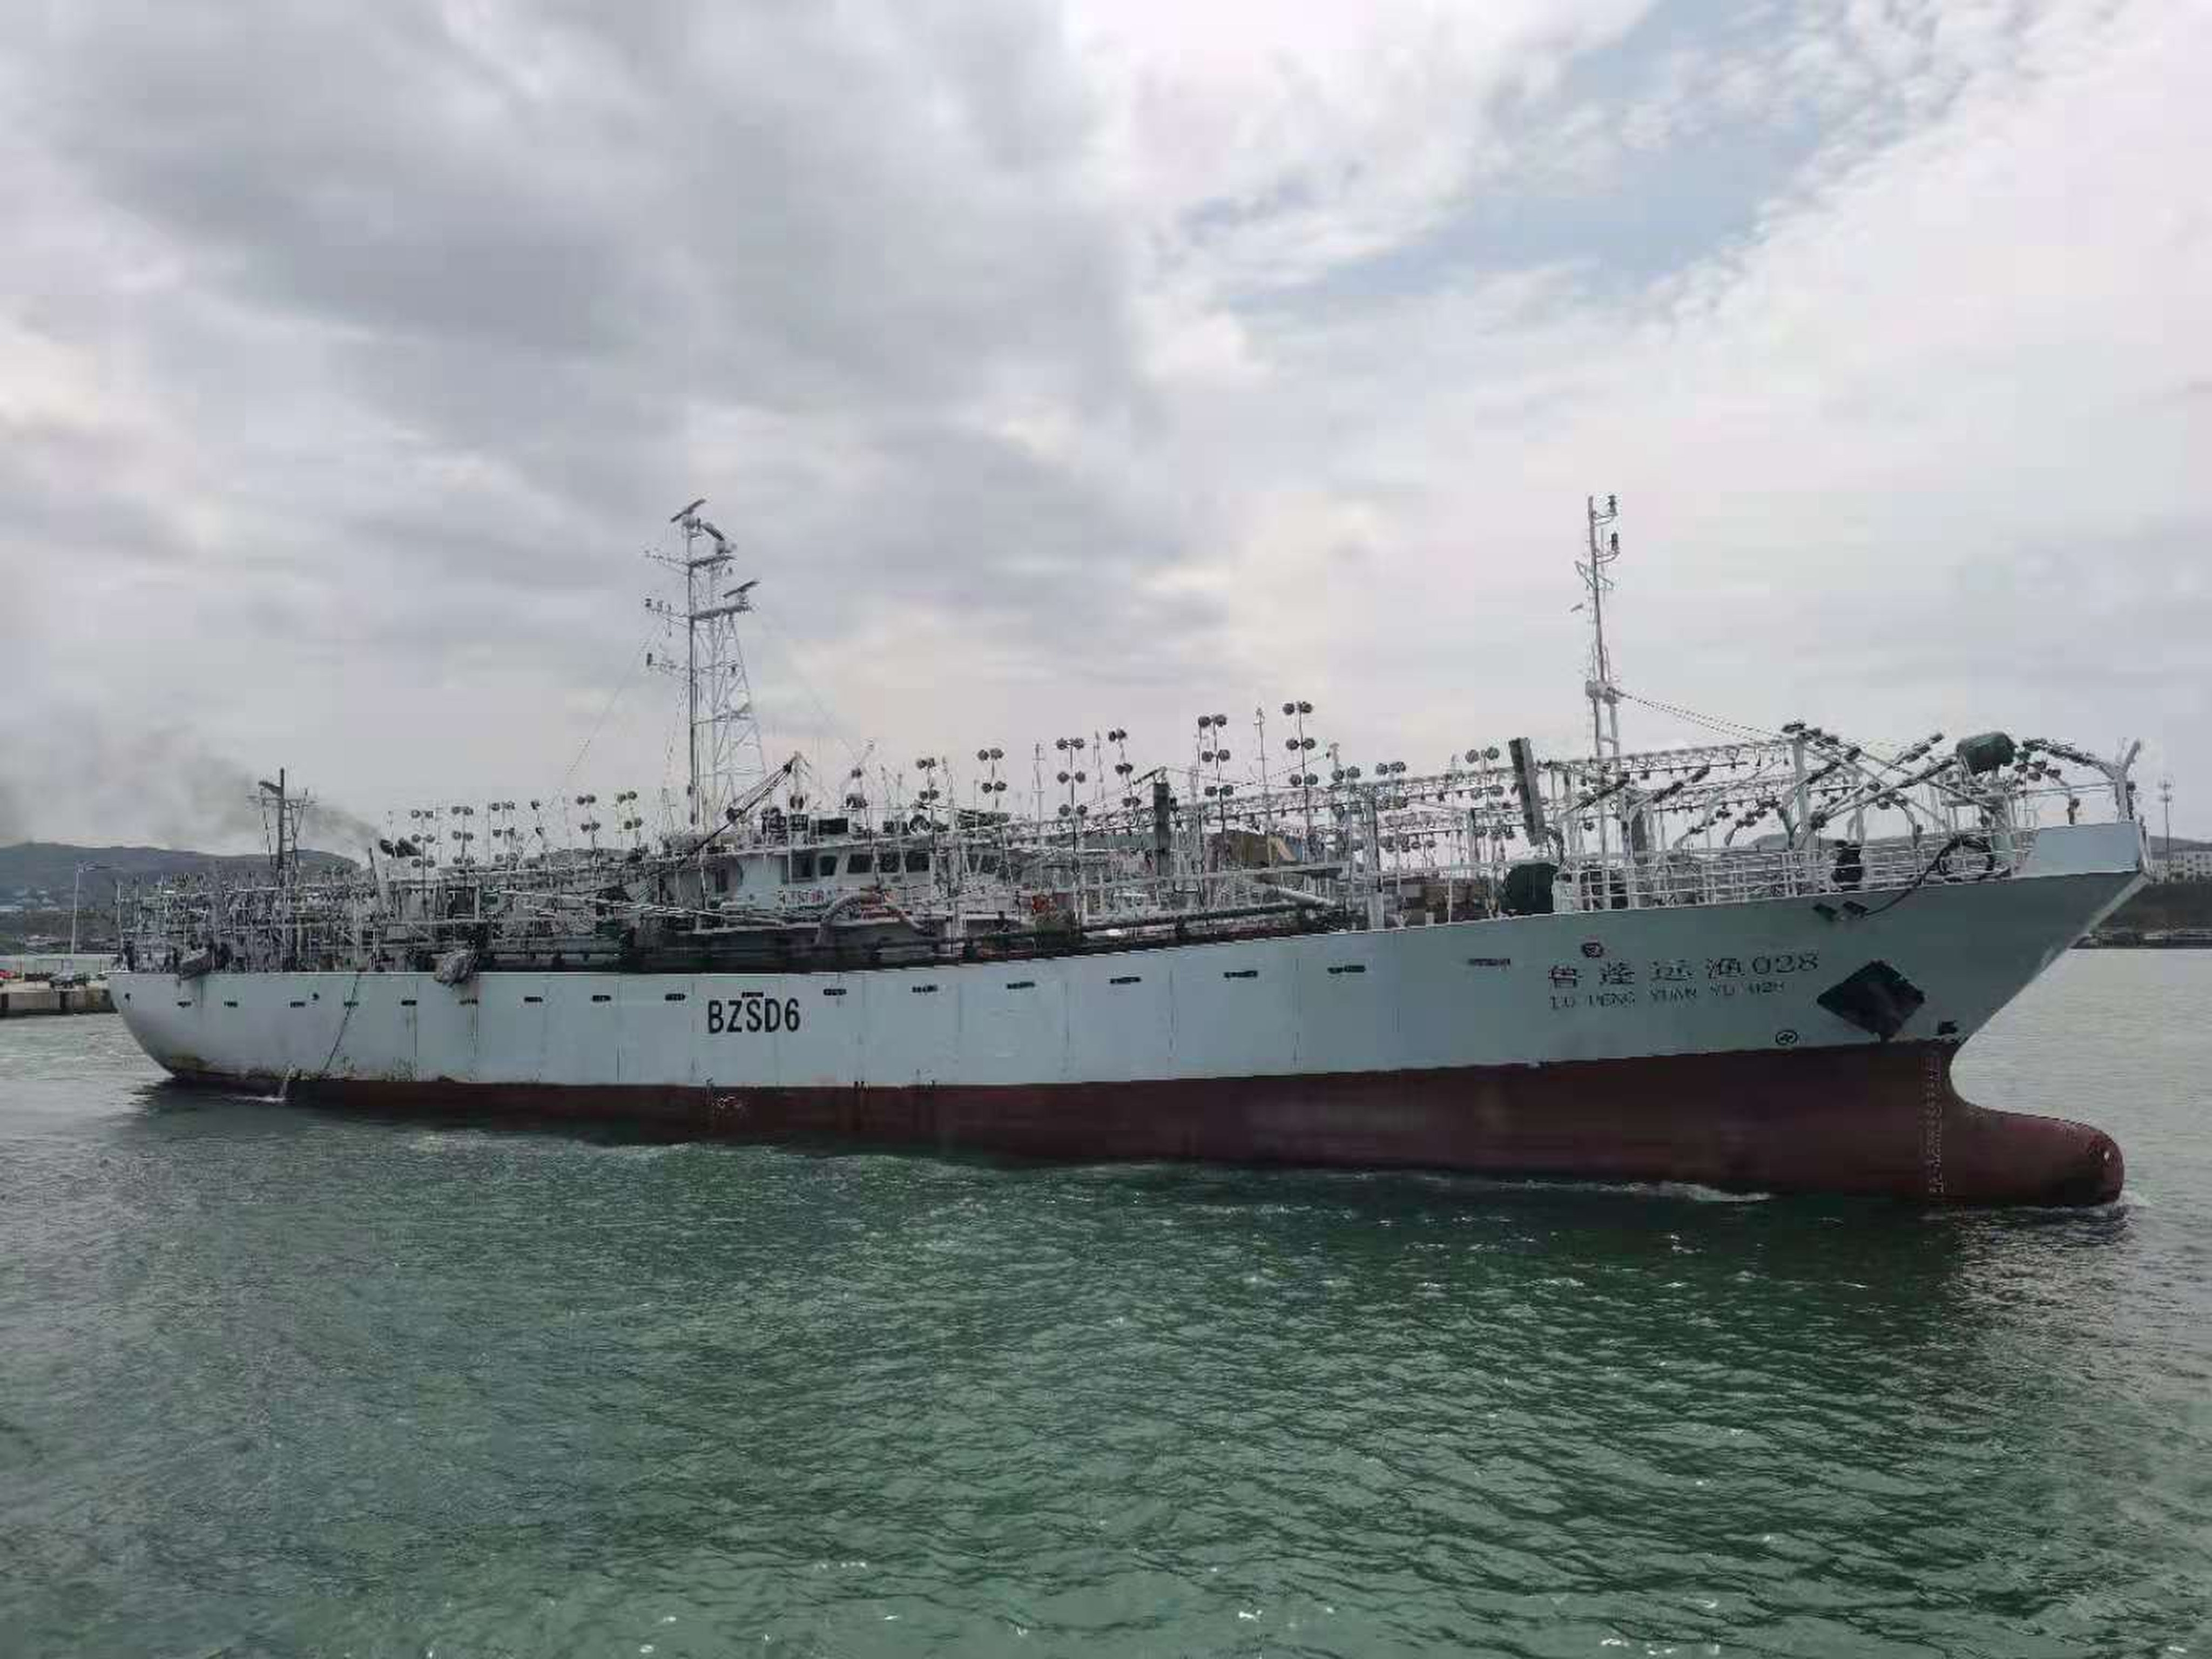 The Lupeng Yuanyu 028, a shipping vessel operated by Penglai Jinglu Fishery, capsized on Tuesday morning. Photo: SCMP